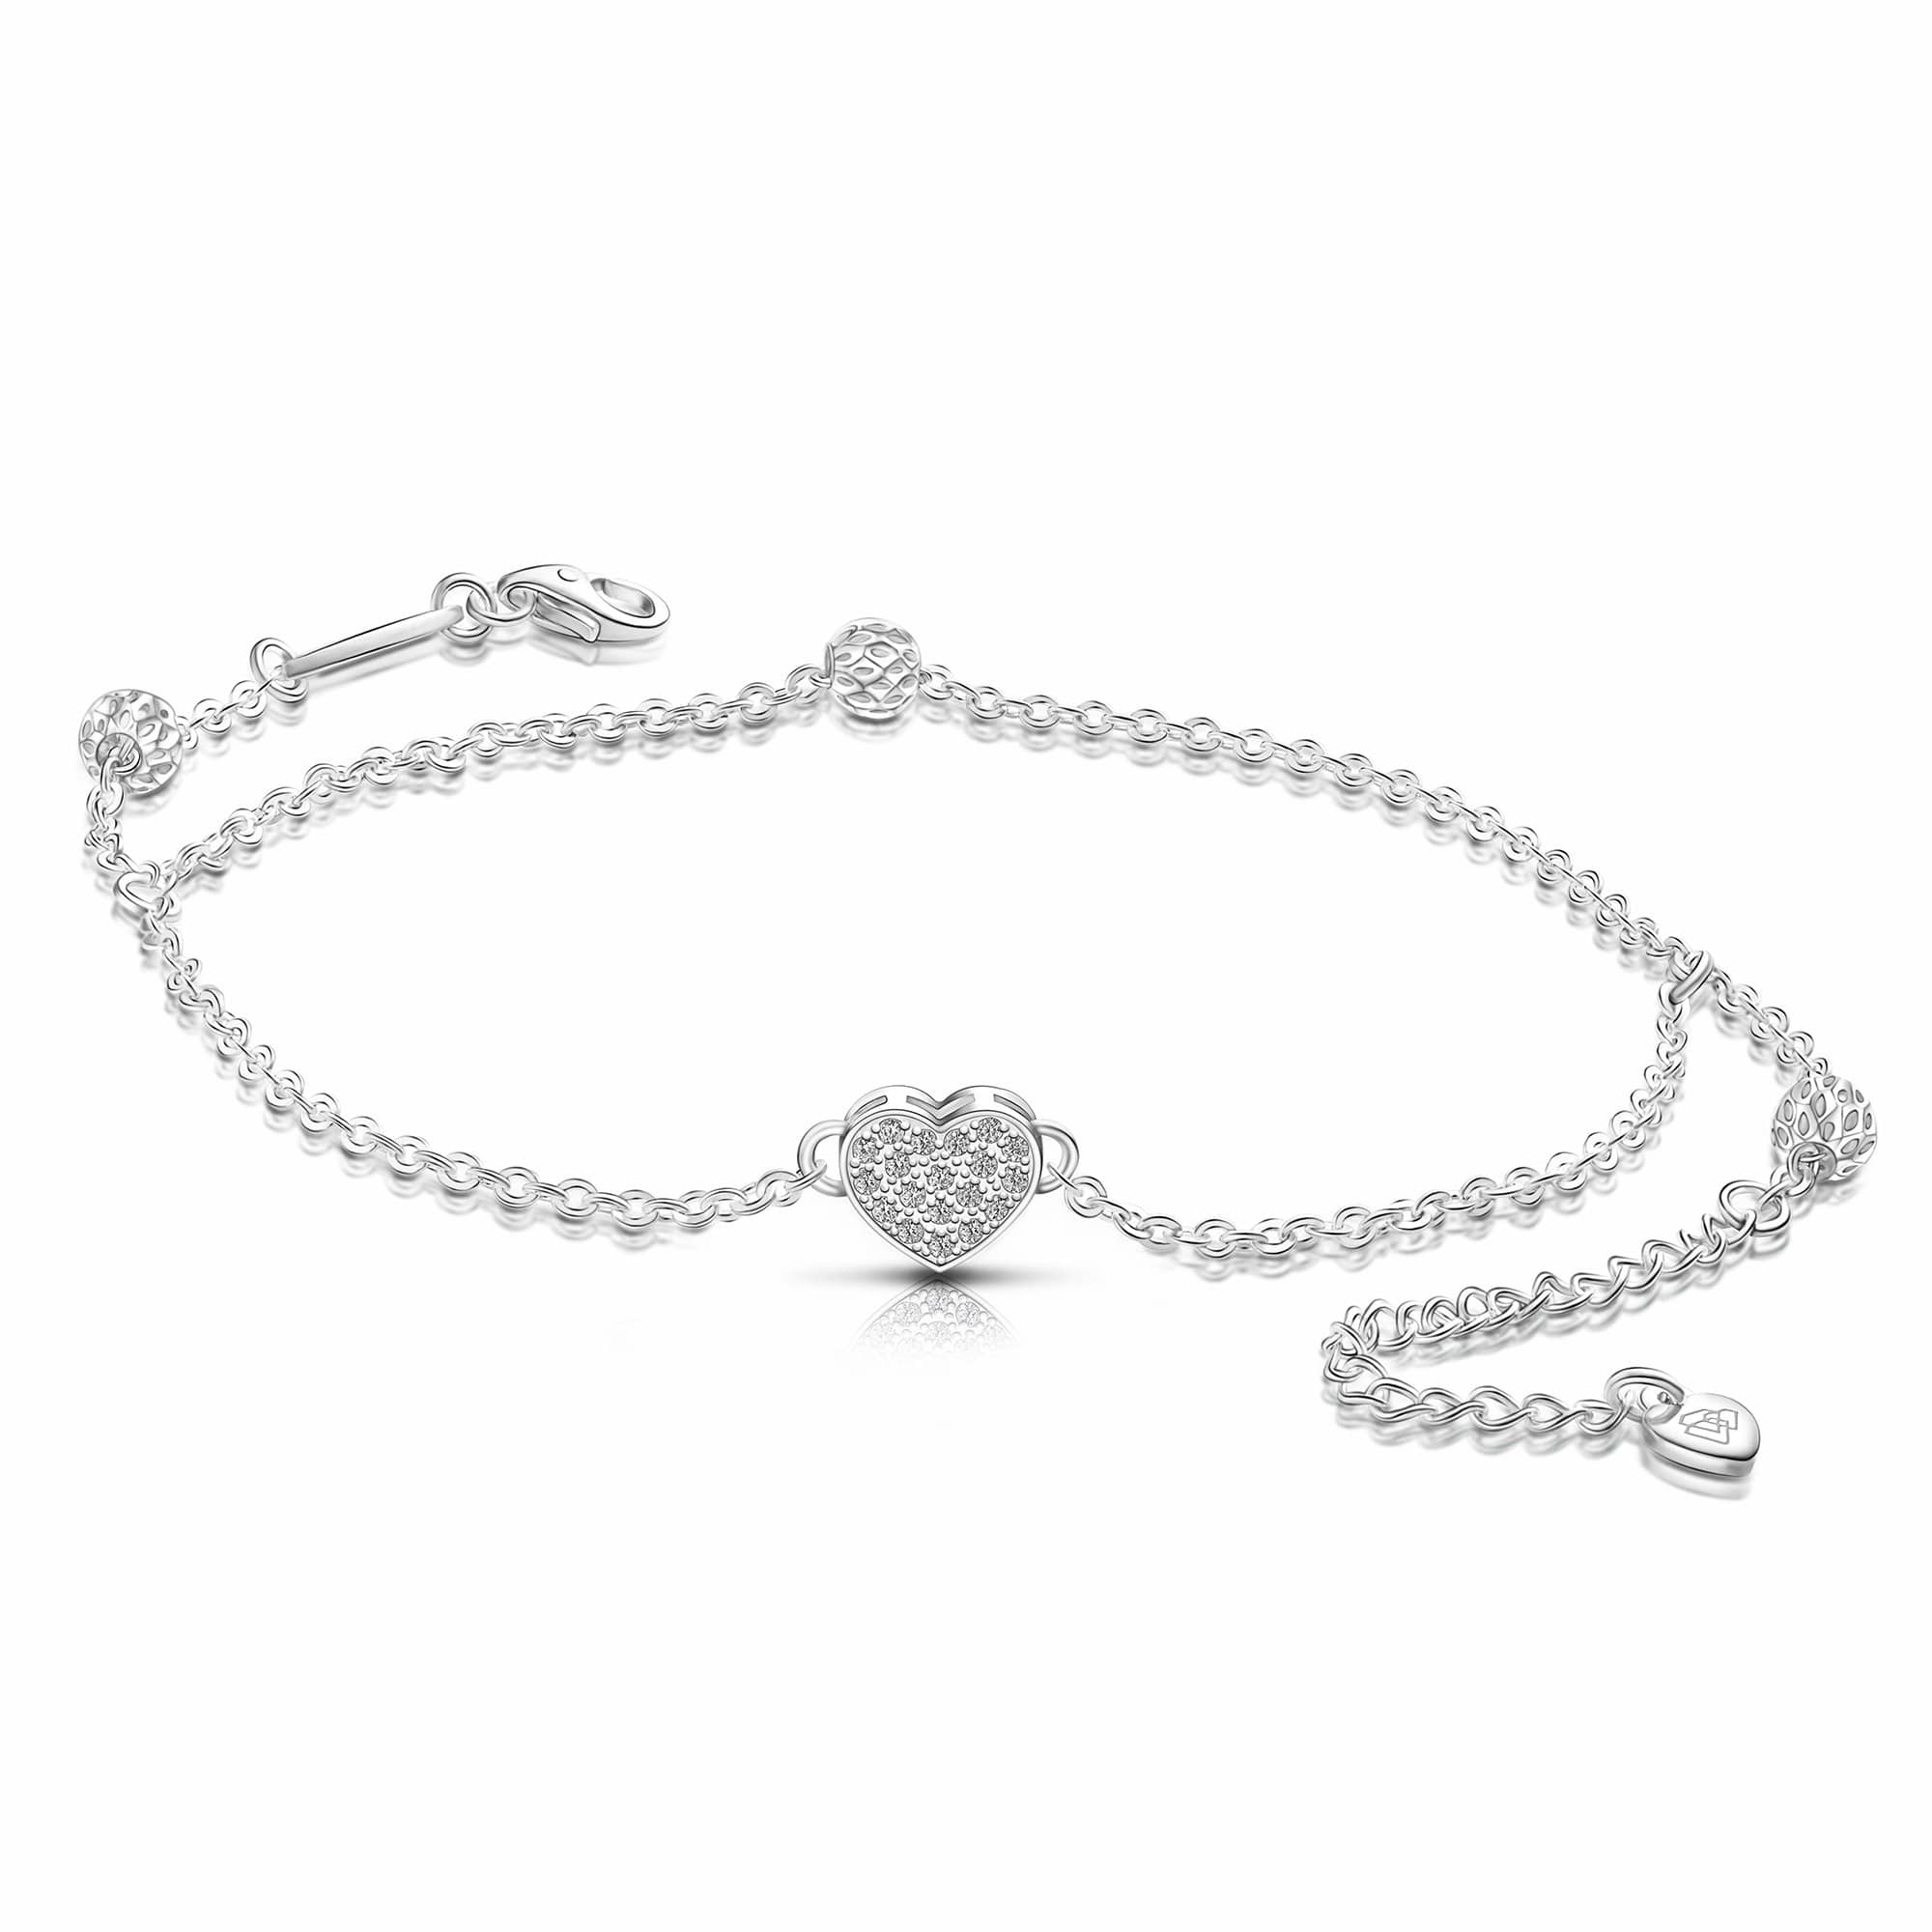 Sterling Silver 925 Cross & Heart Double Chain Anklet Heart Ankle